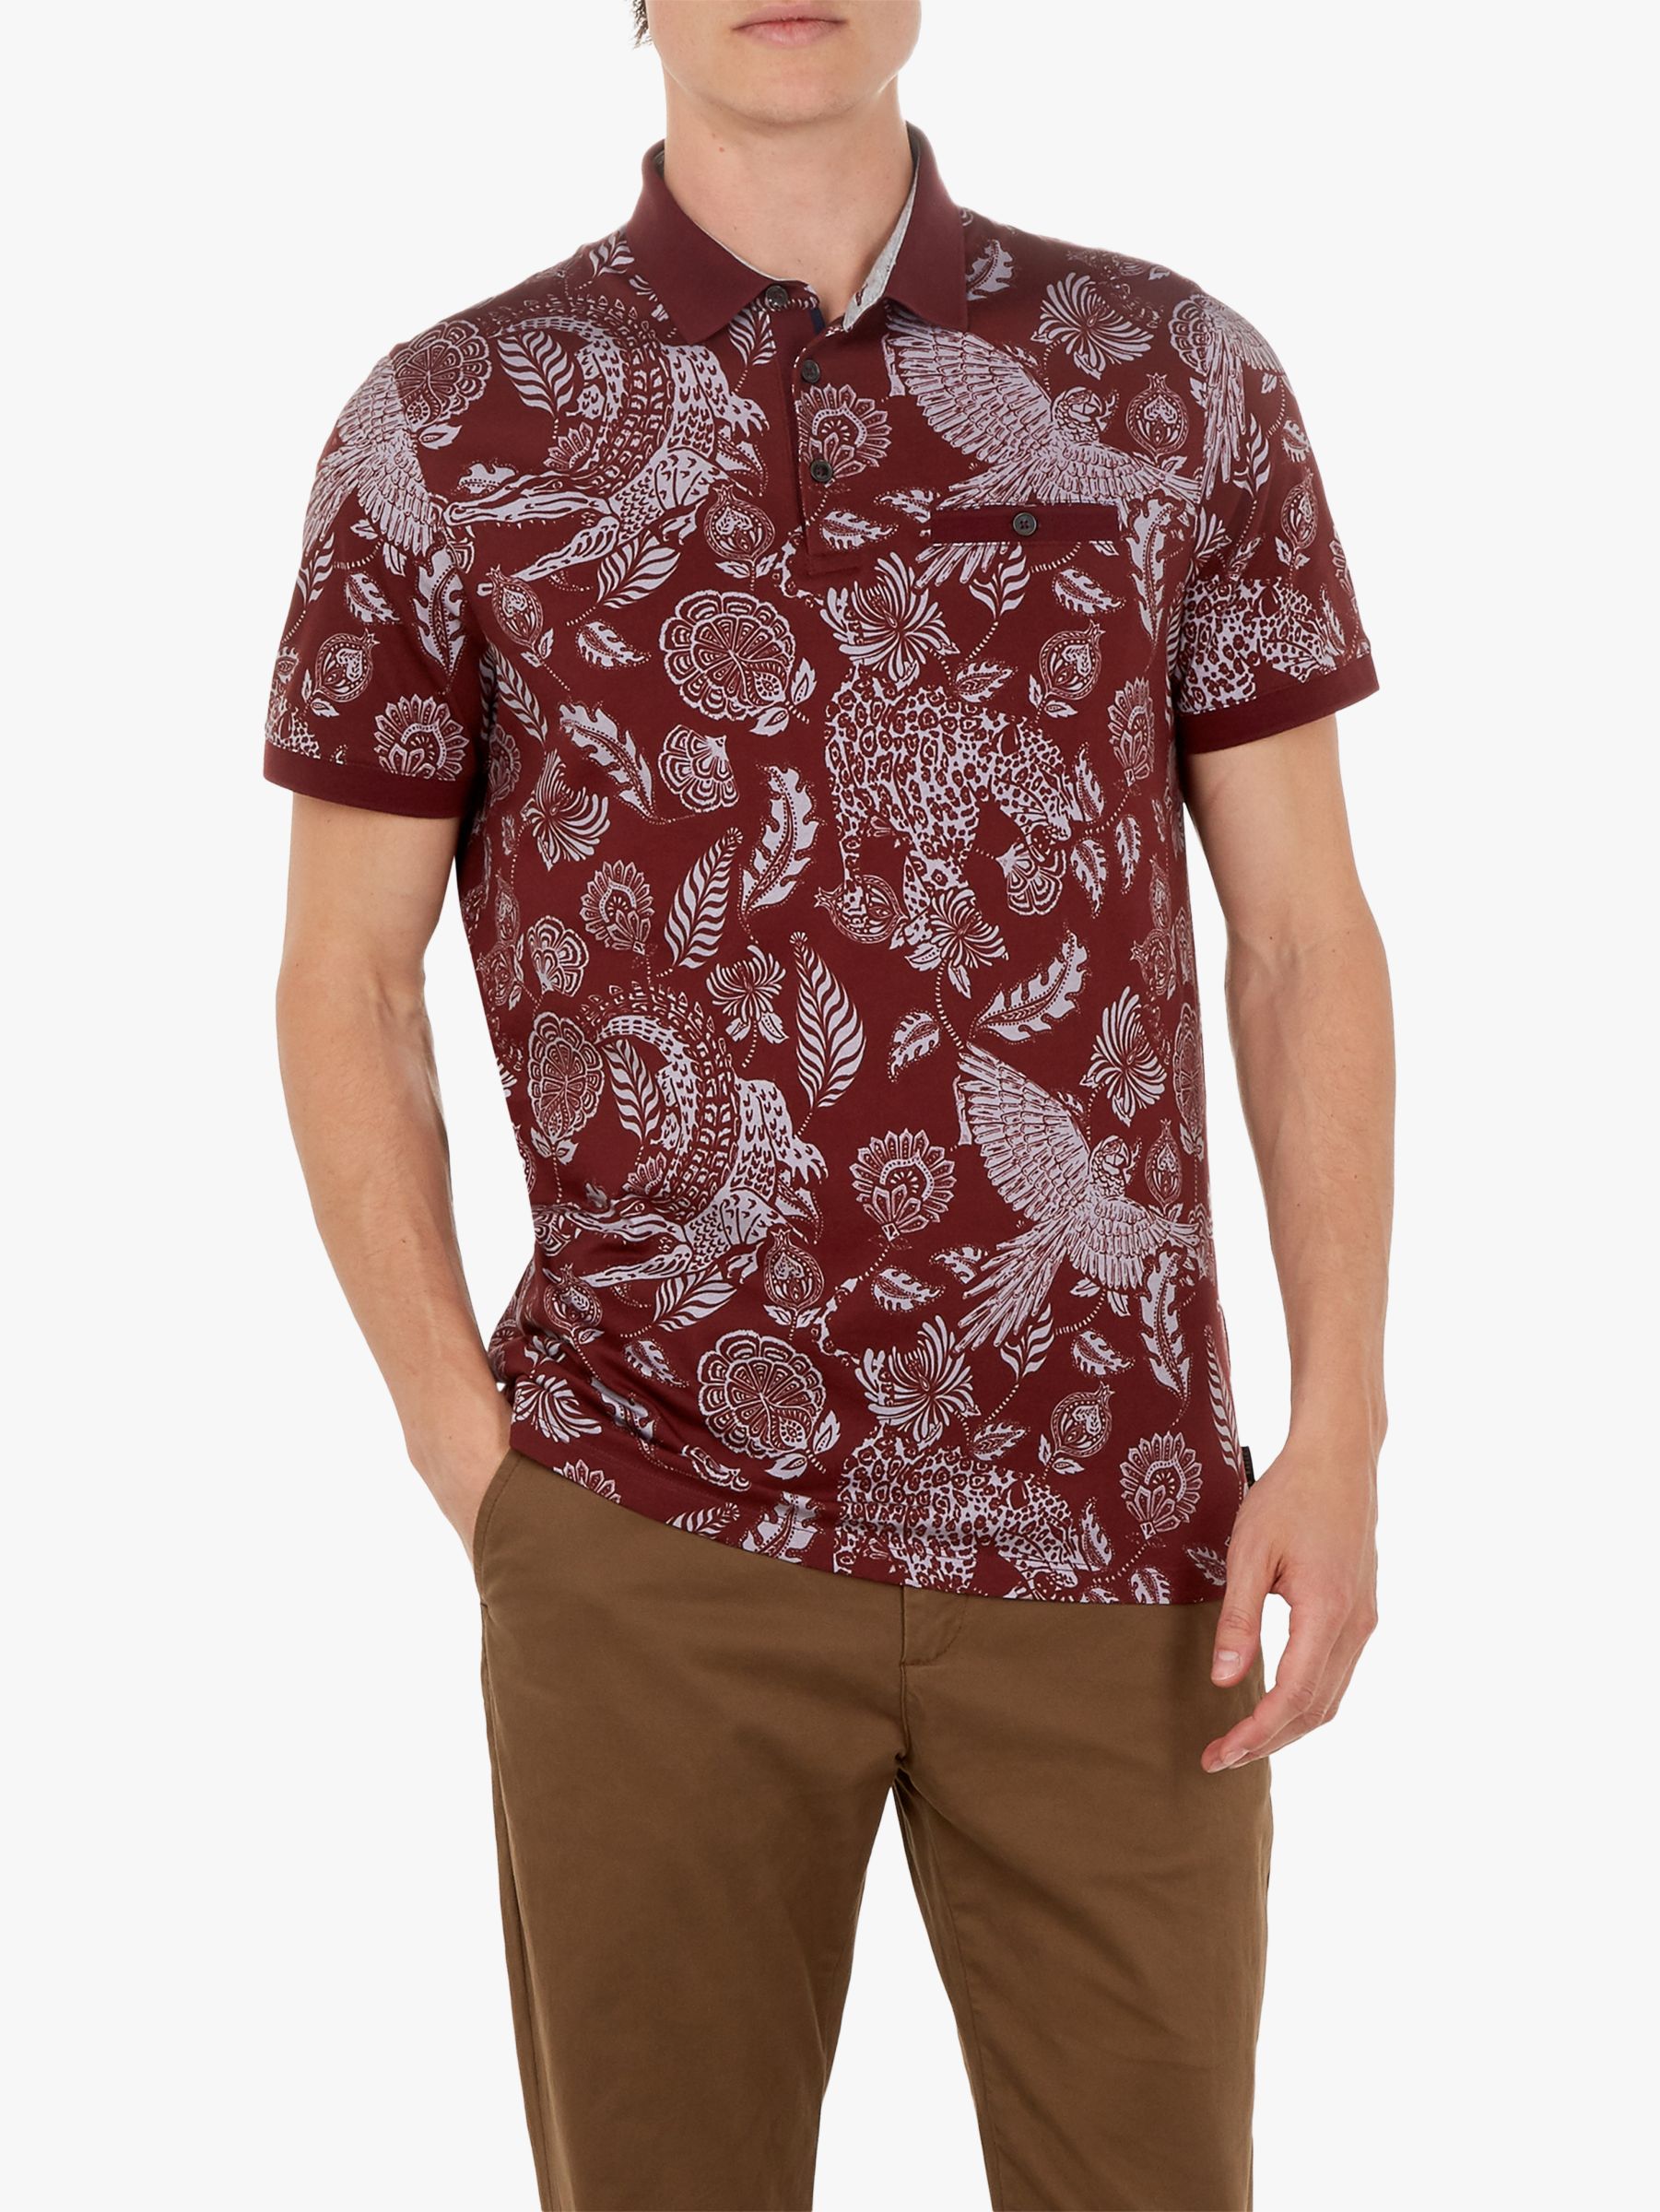 Ted Baker Colabot Floral Print Polo Shirt, Dark Red